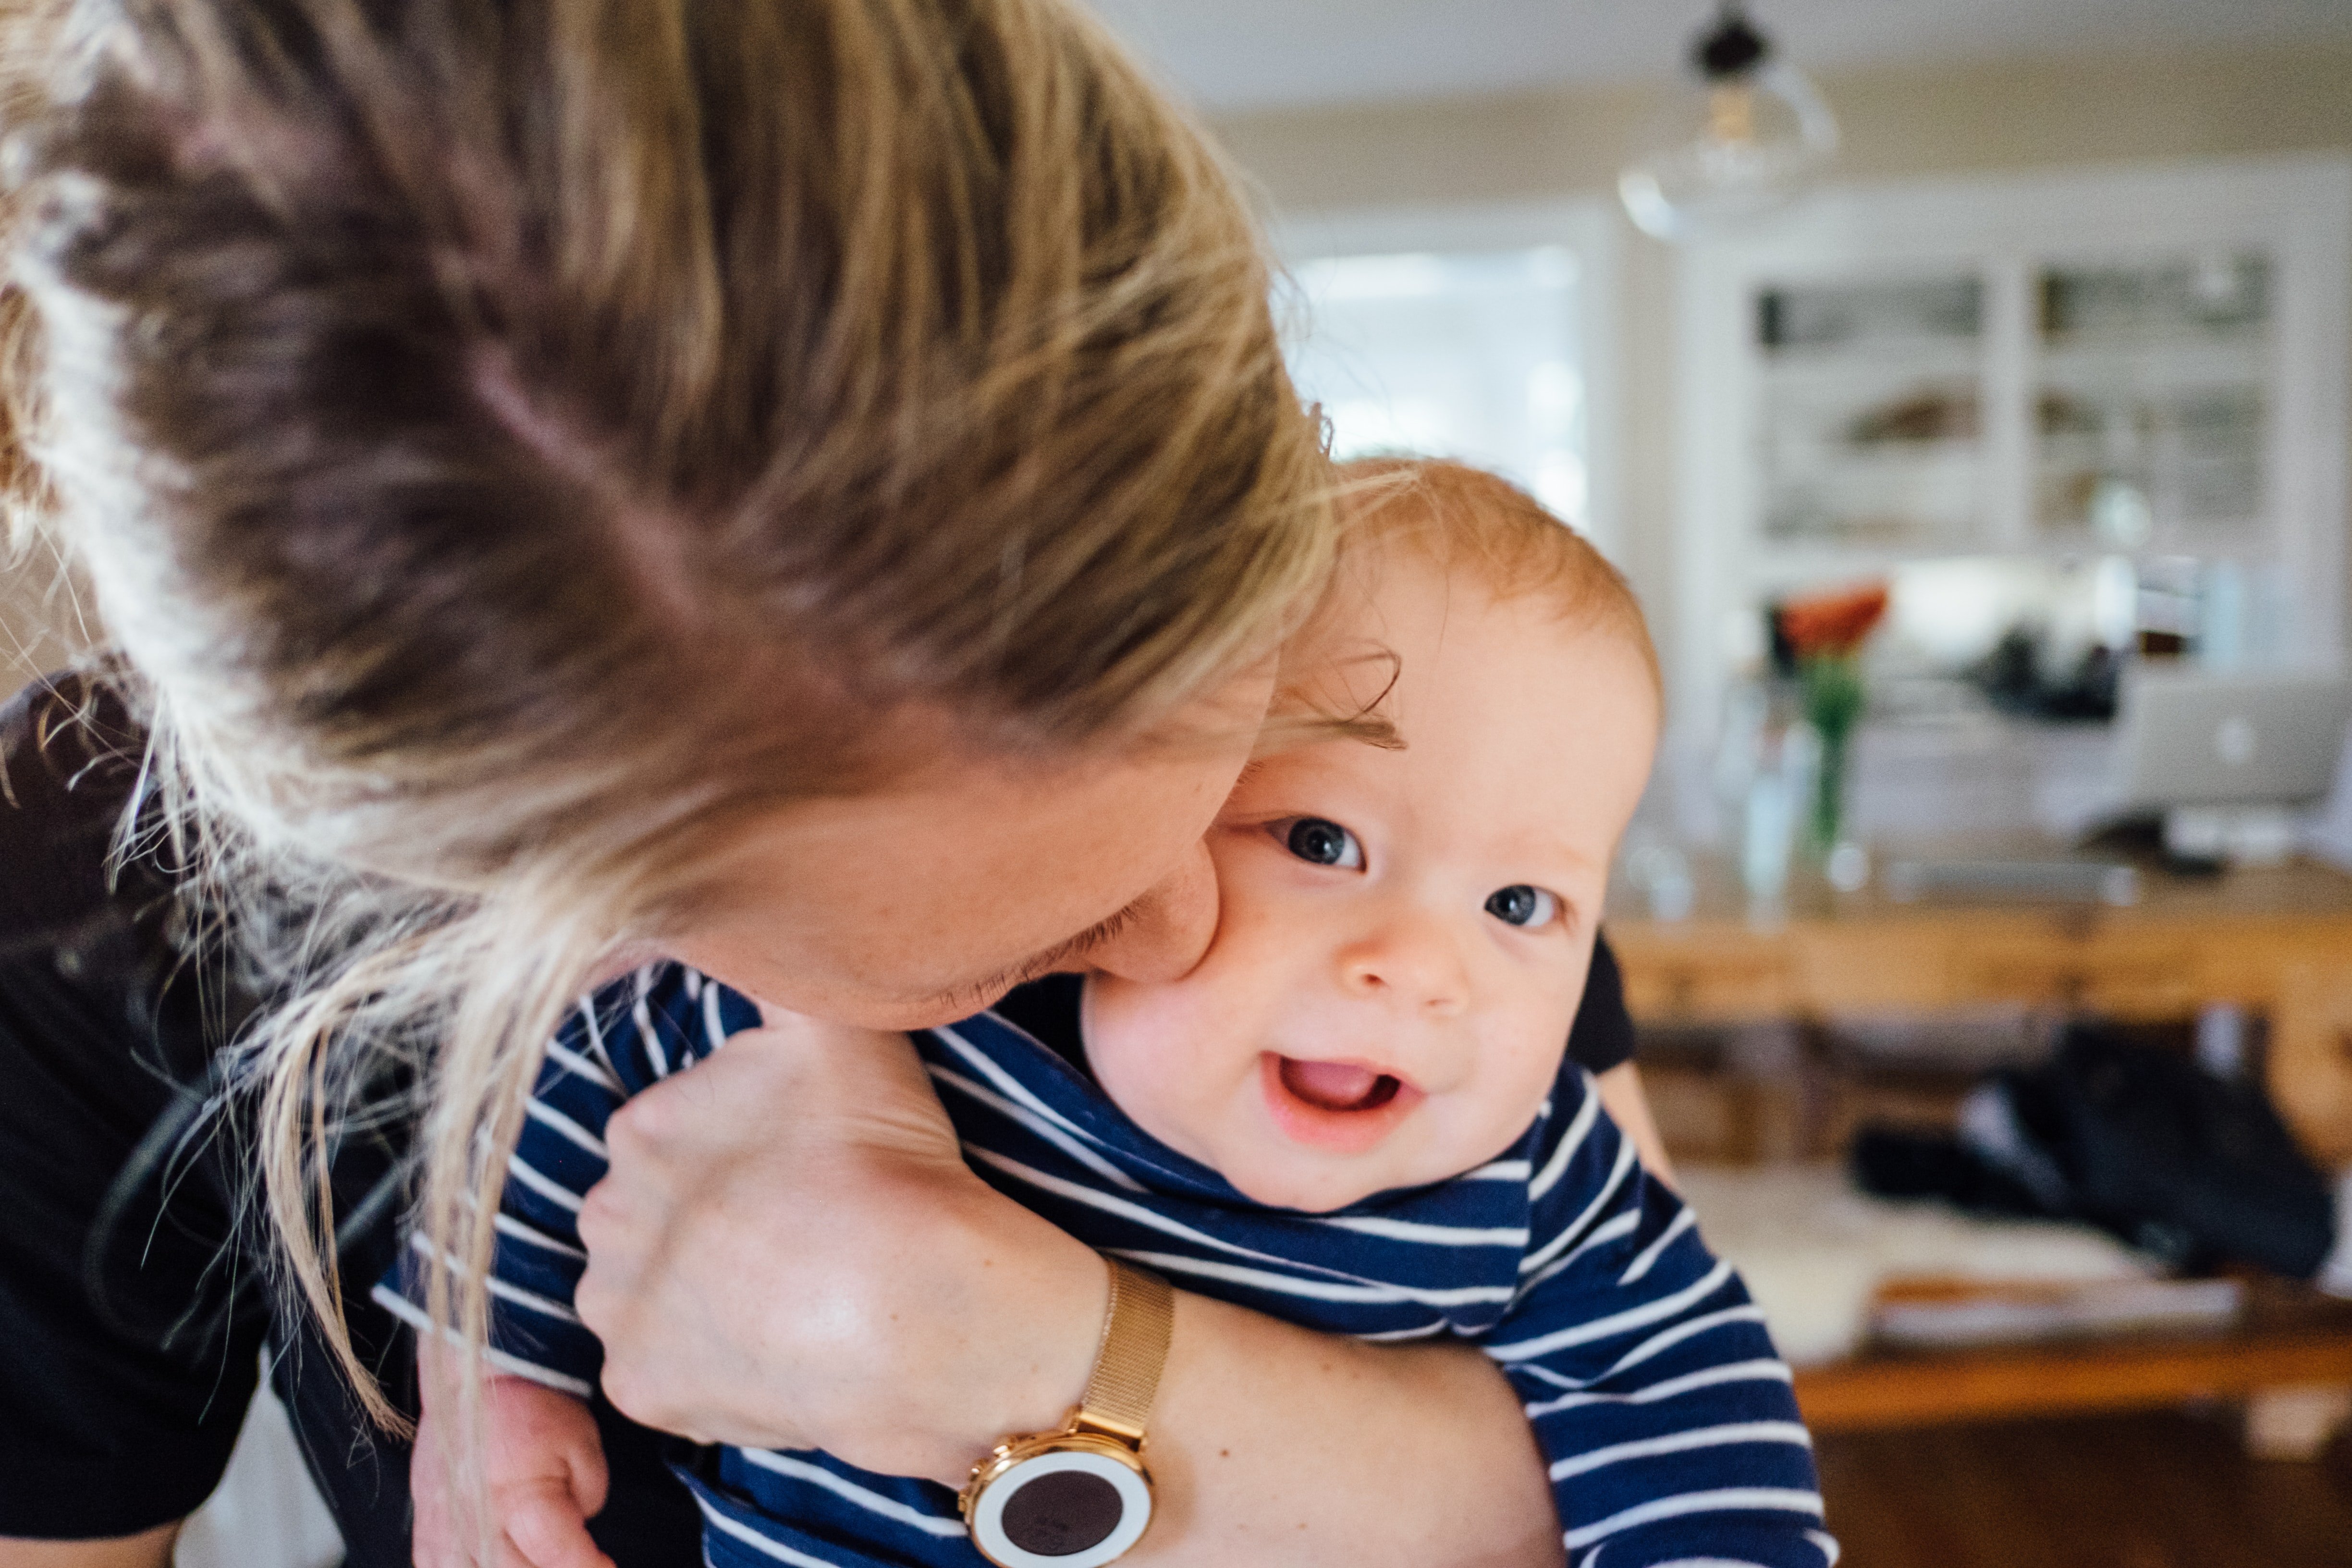 The woman refused to let her partner meet their baby until he sorted their communication issues | Source: Unsplash